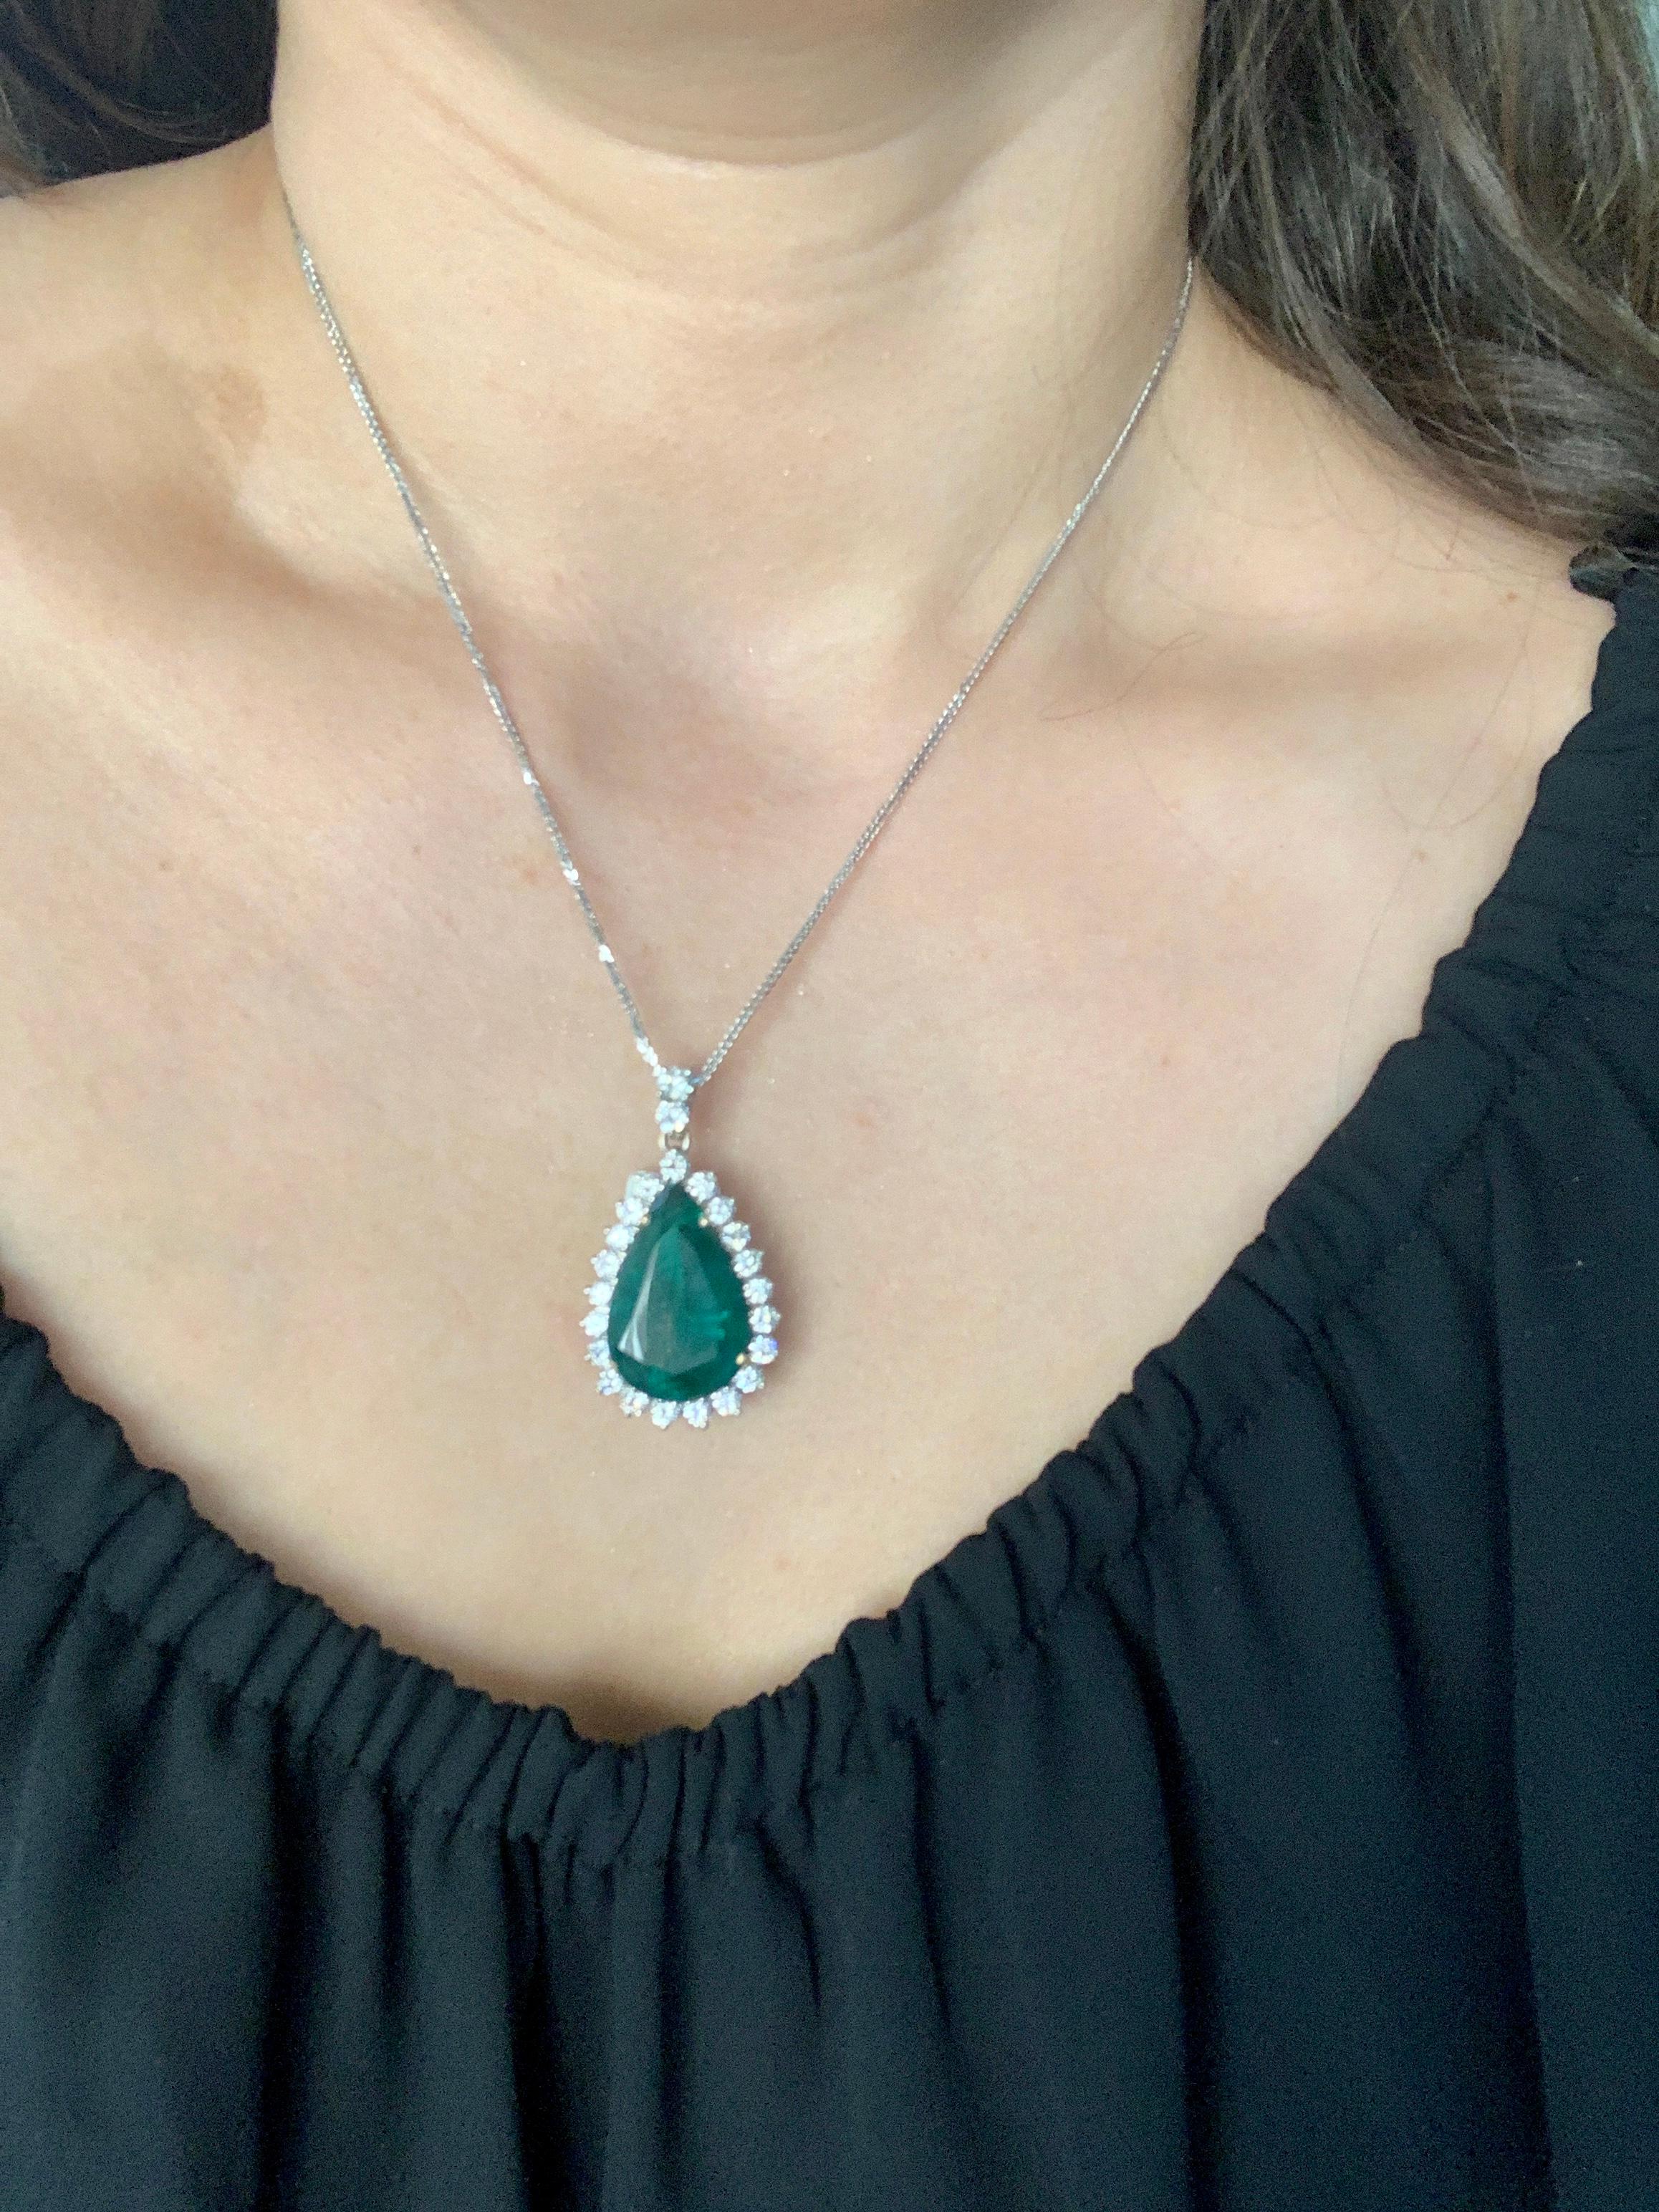 15 Ct Pear Hydro Emerald & 4 Ct Diamond Pendent/Necklace 18 Kt White Gold For Sale 5